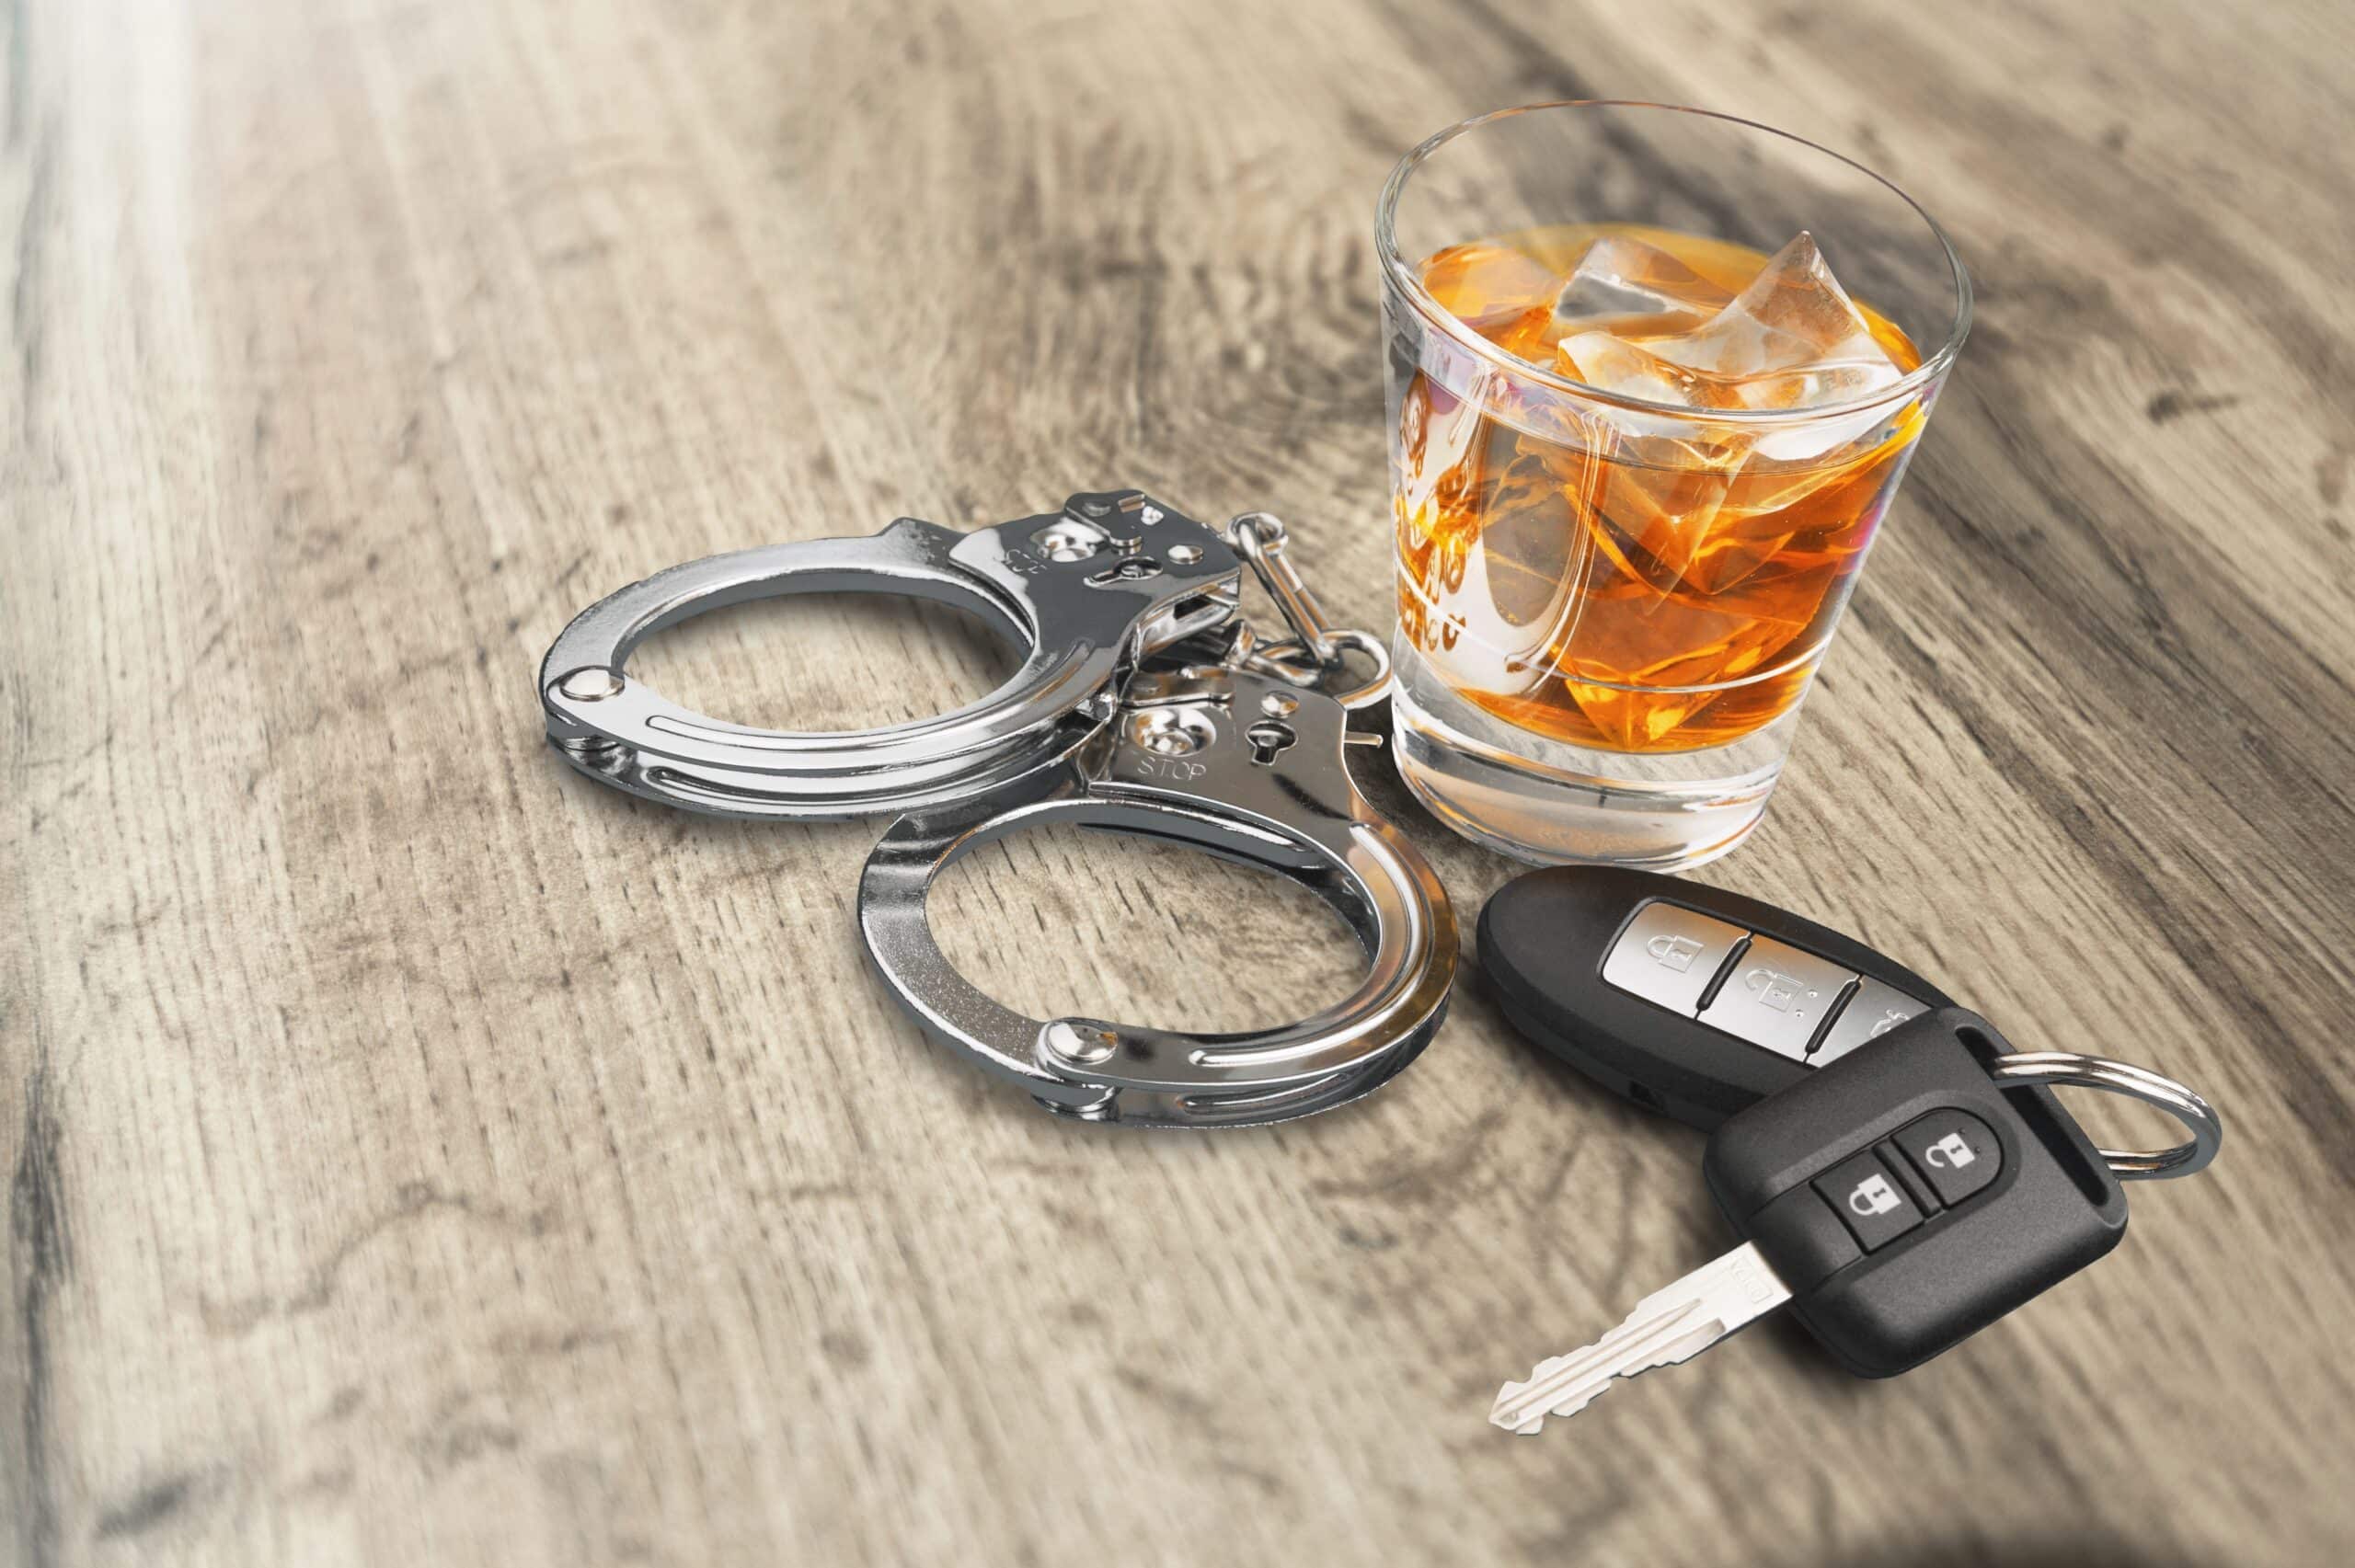 When facing a DUI charge, it is tough to know when you should hire an attorney. This article explores some things to consider.